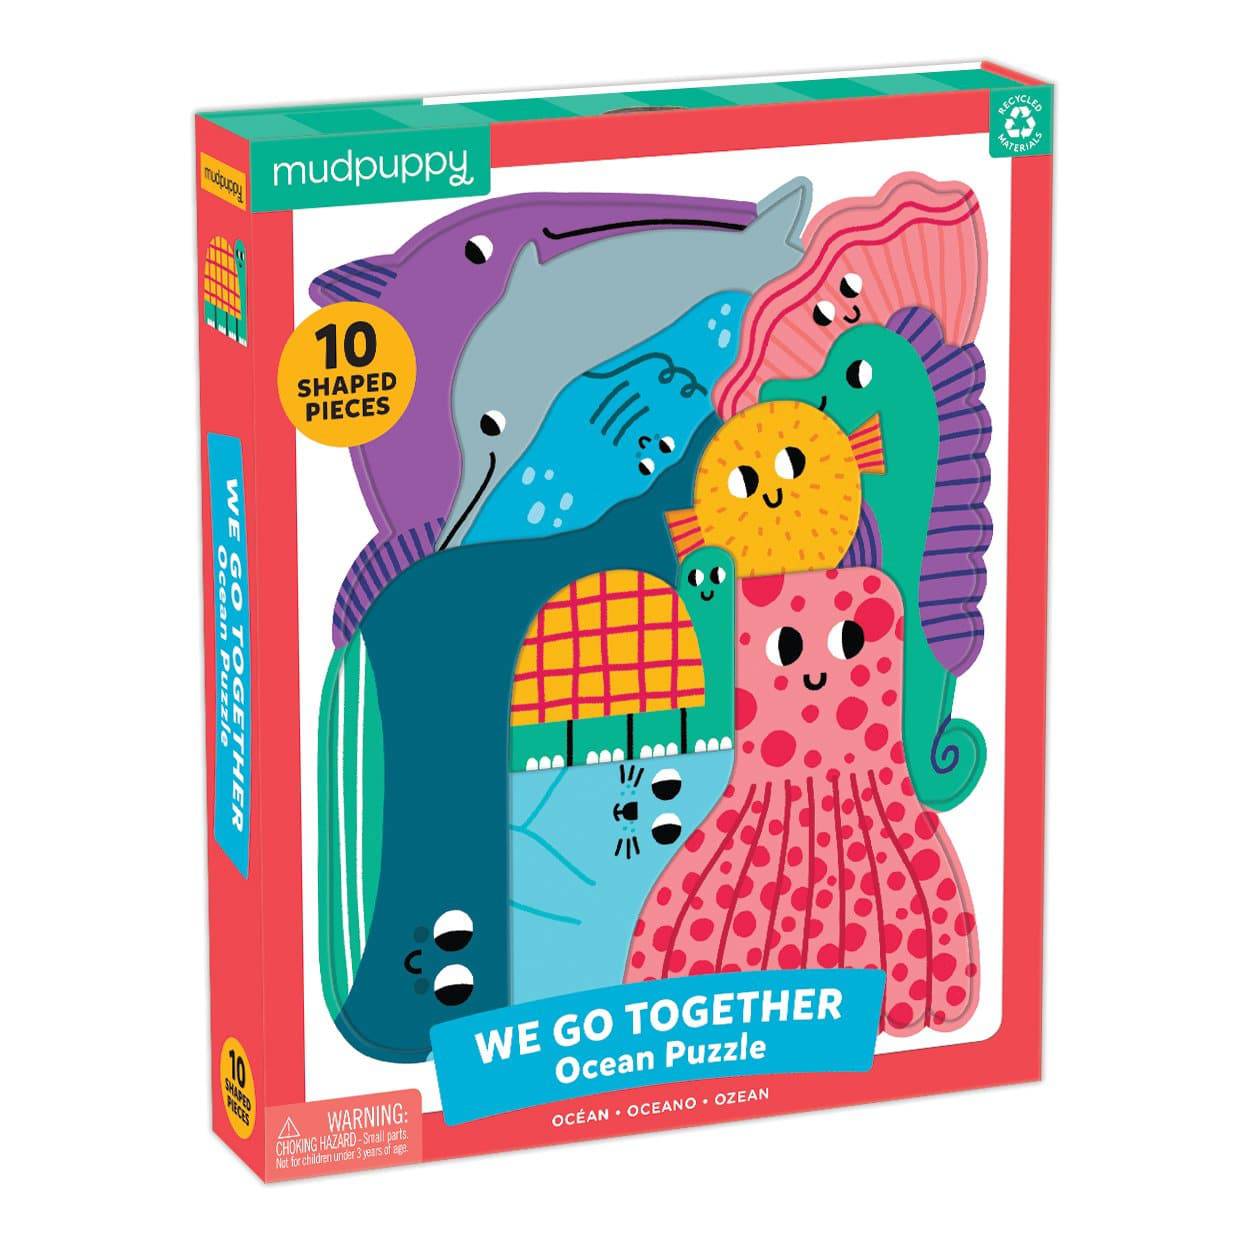 Ocean We Go Together Puzzle - Twinkle Twinkle Little One